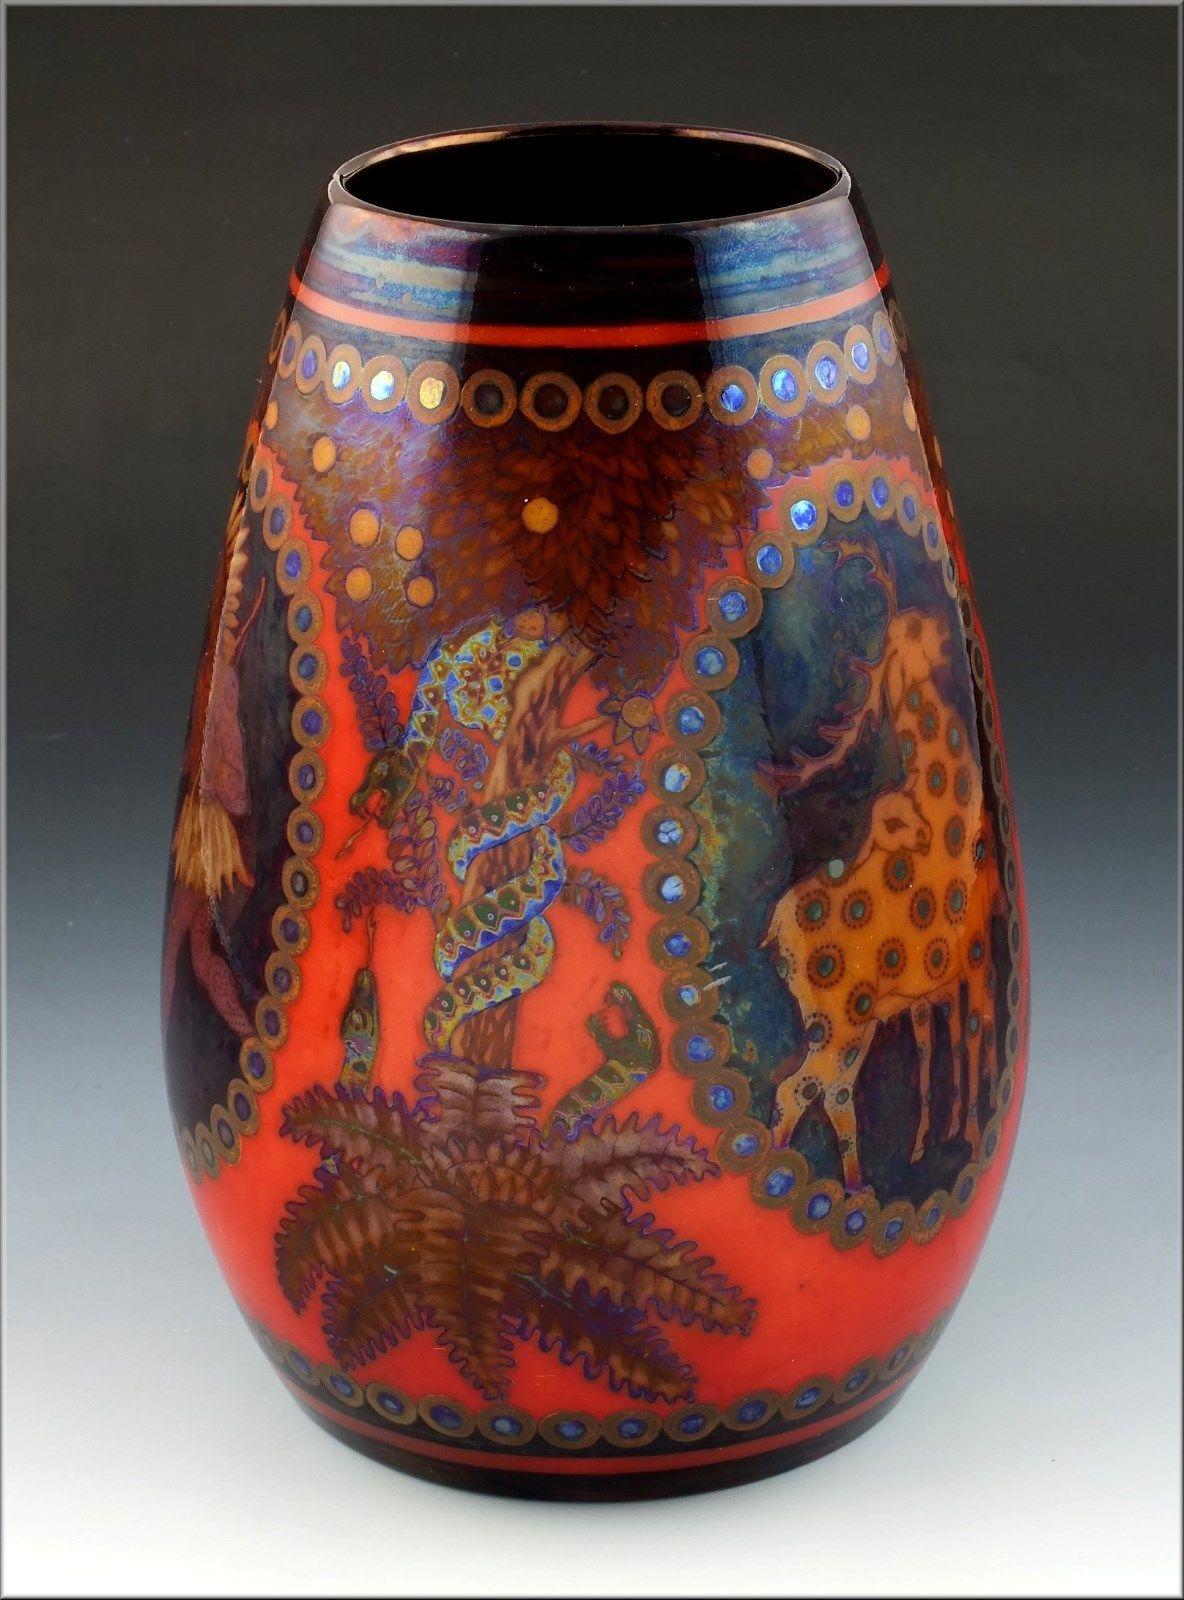 European art pottery vase of nice form, decorated with oval views of American Indian and deer. Between the views are snakes coiled around fruit trees and it is finished in an eosin glaze. It has the Zsolnay Pecs raised pallet mark on the